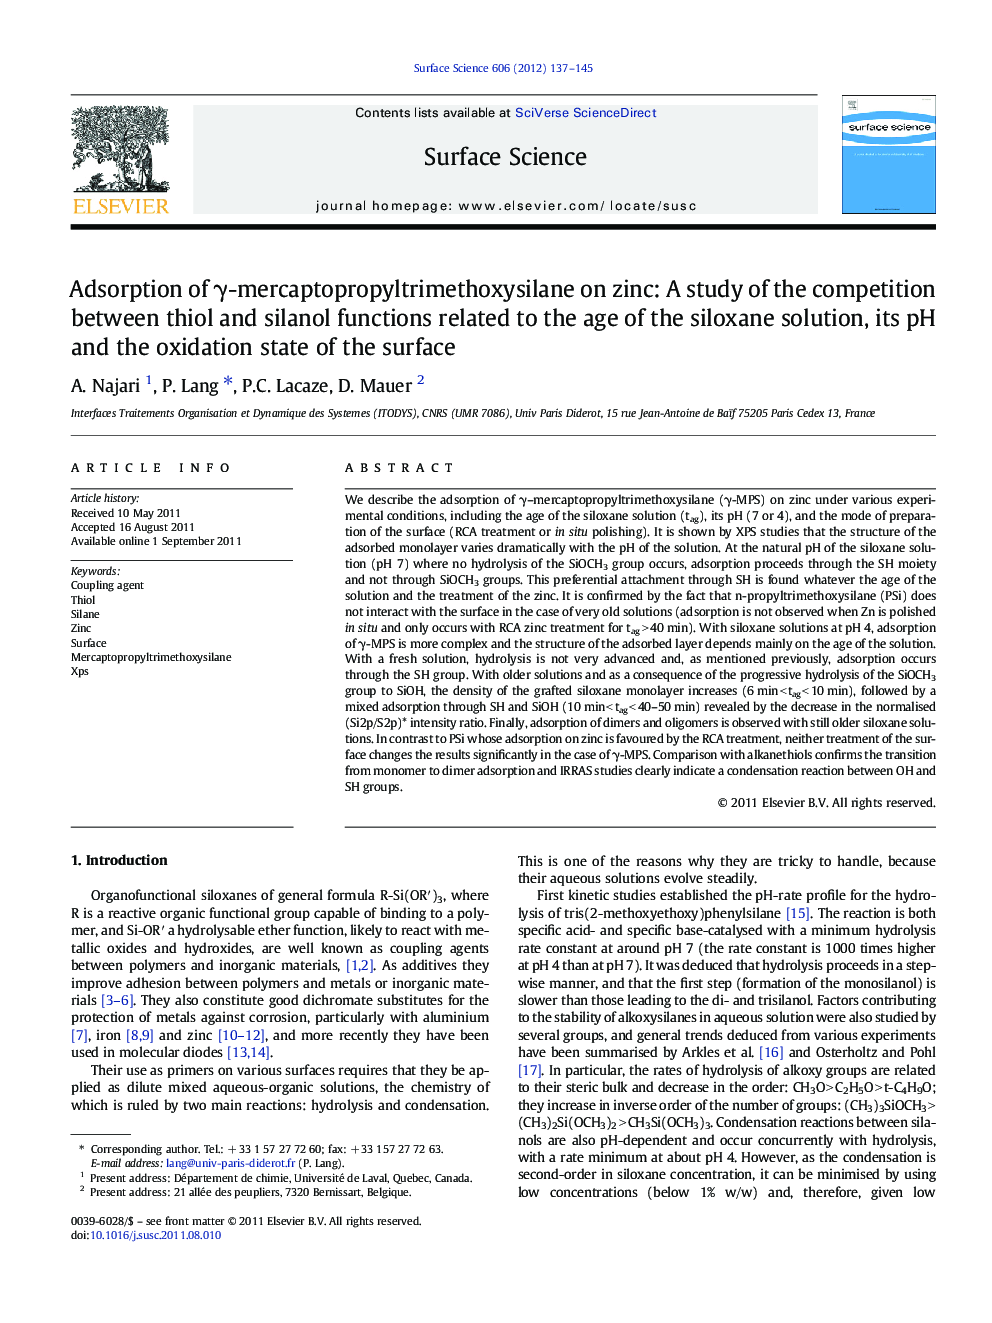 Adsorption of Î³-mercaptopropyltrimethoxysilane on zinc: A study of the competition between thiol and silanol functions related to the age of the siloxane solution, its pH and the oxidation state of the surface